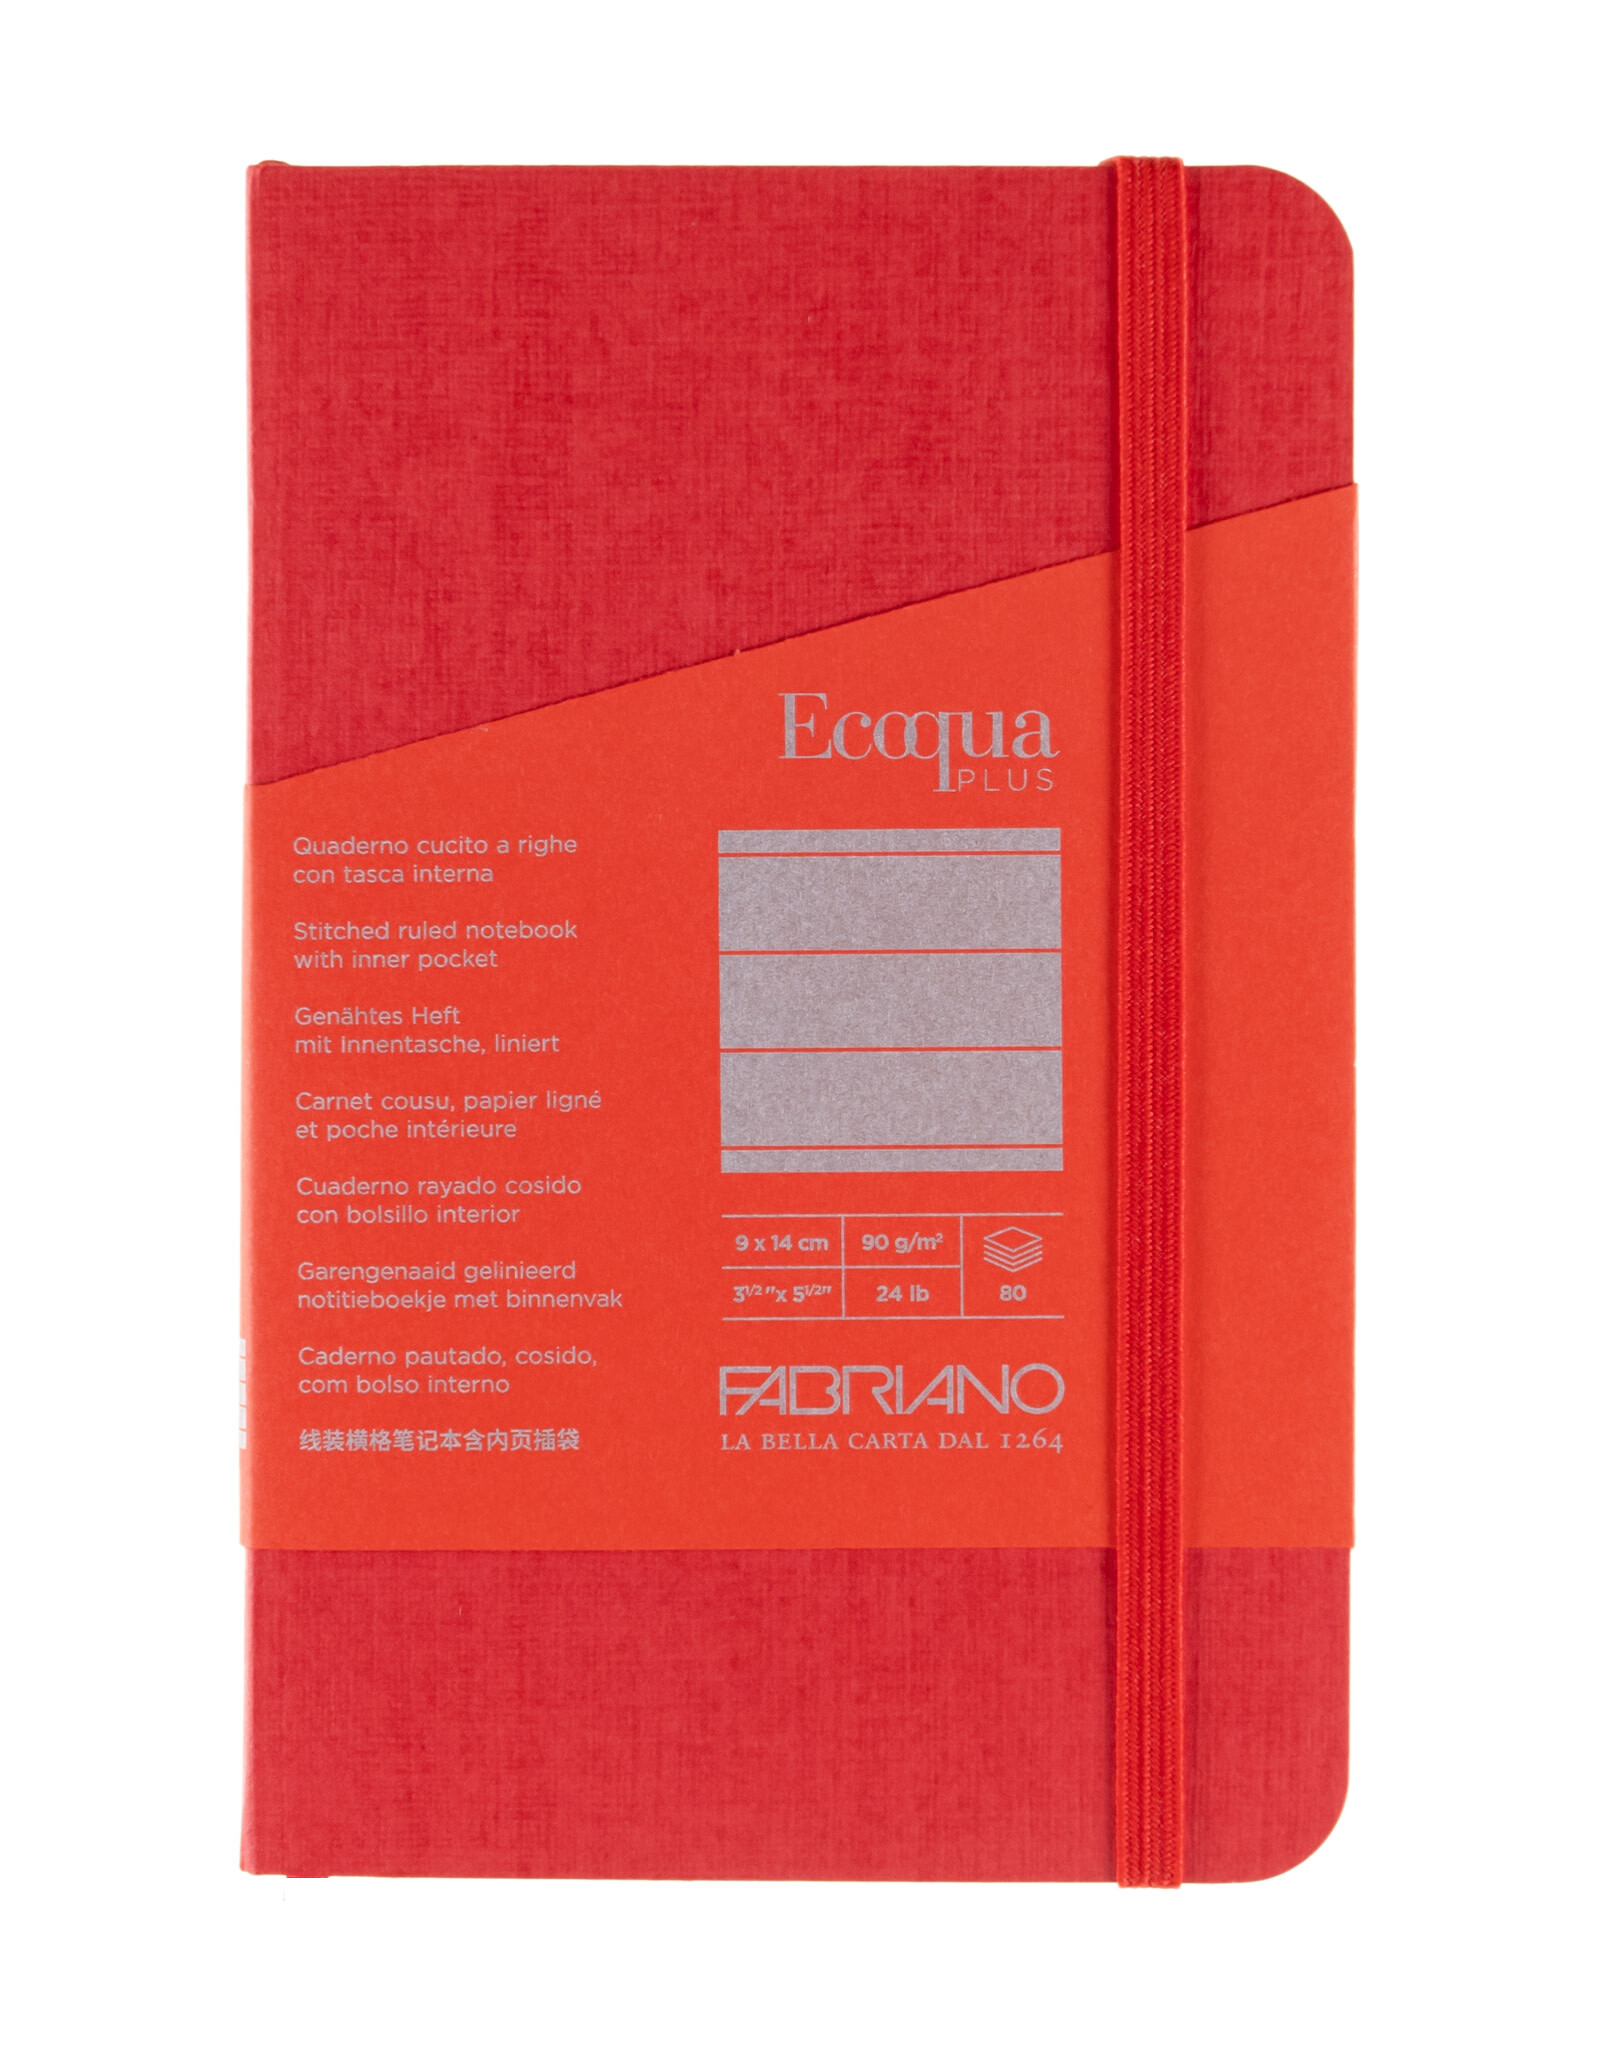 Ecoqua Plus Sewn Spine Notebook, Red, 3.5” x 5.5”, Ruled